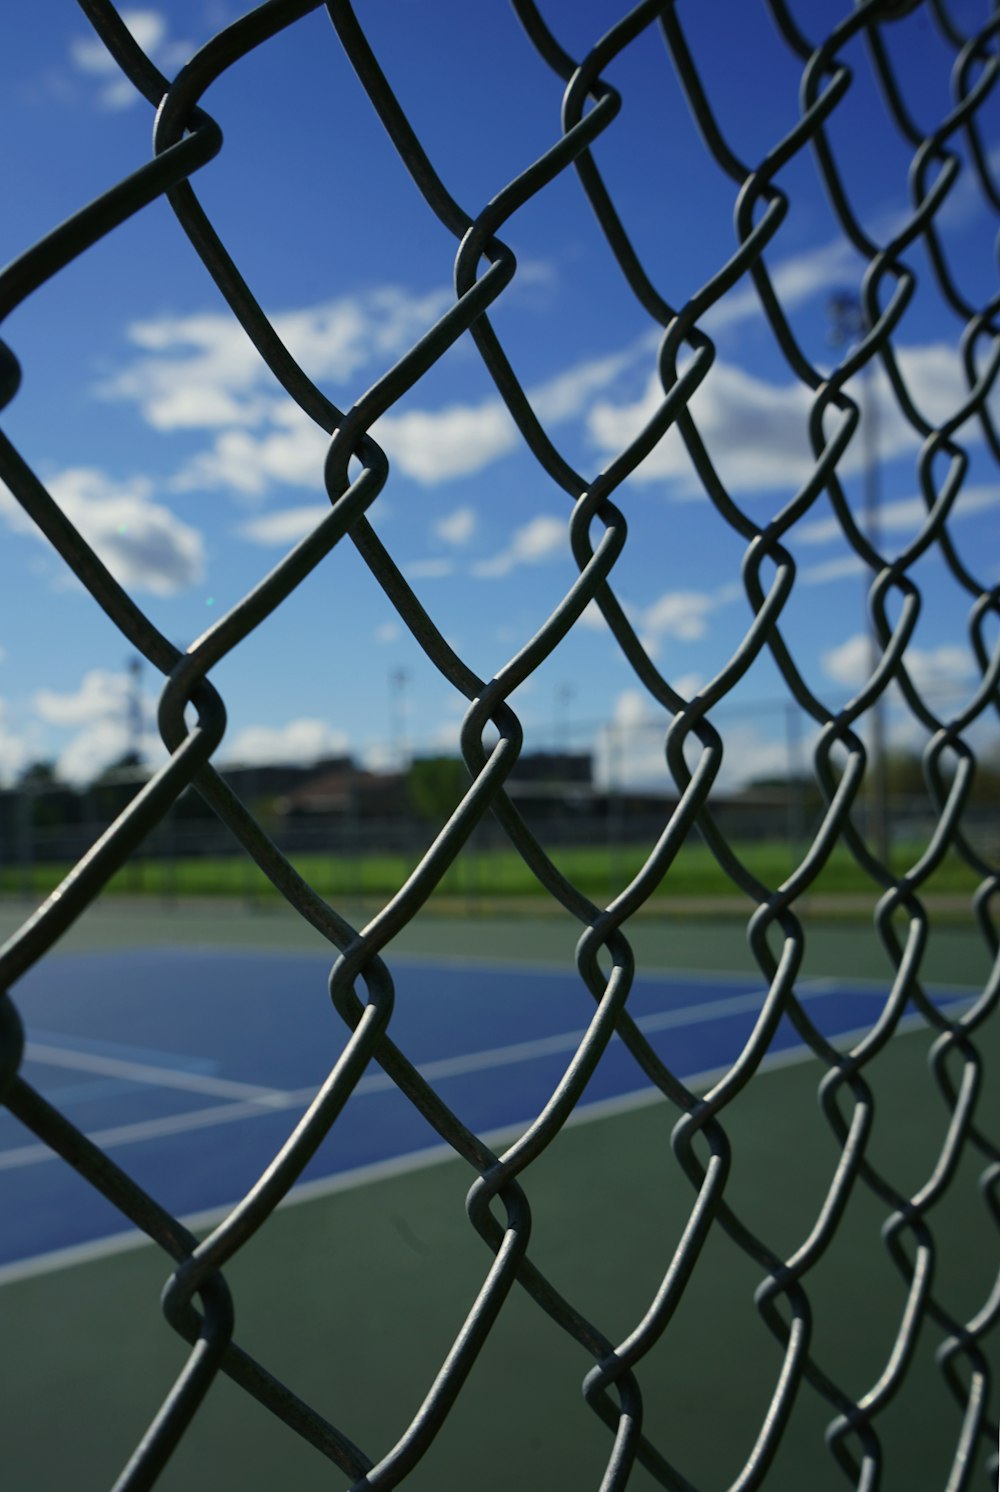 a tennis court with a chain link fence